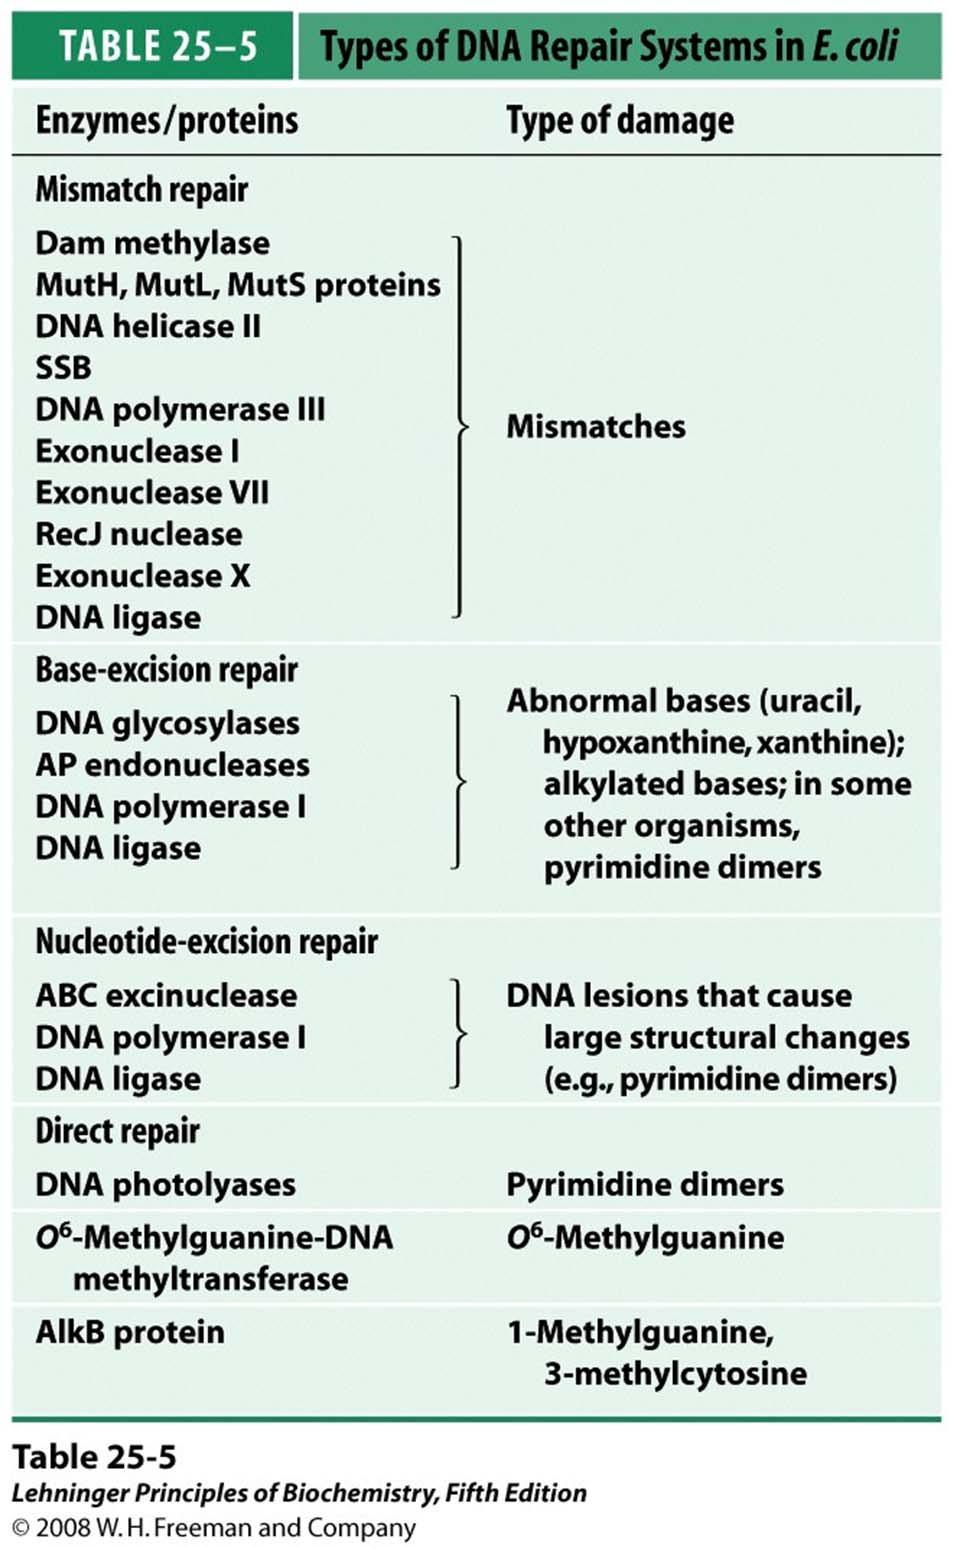 TABLE 25-5 Types of DNA